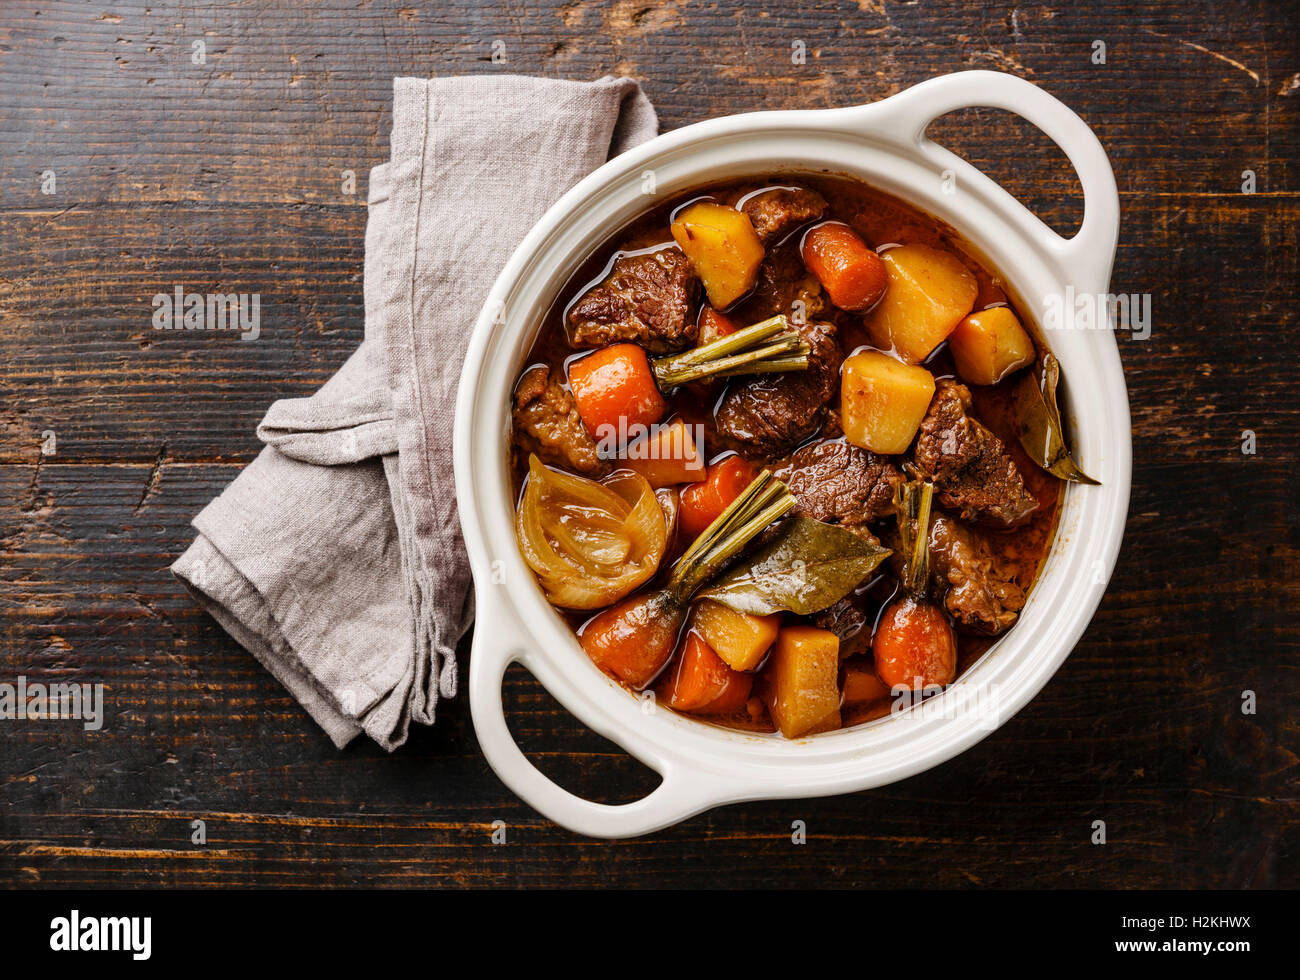 Beef meat stewed with potatoes, carrots and spices in ceramic pot on wooden background Stock Photo